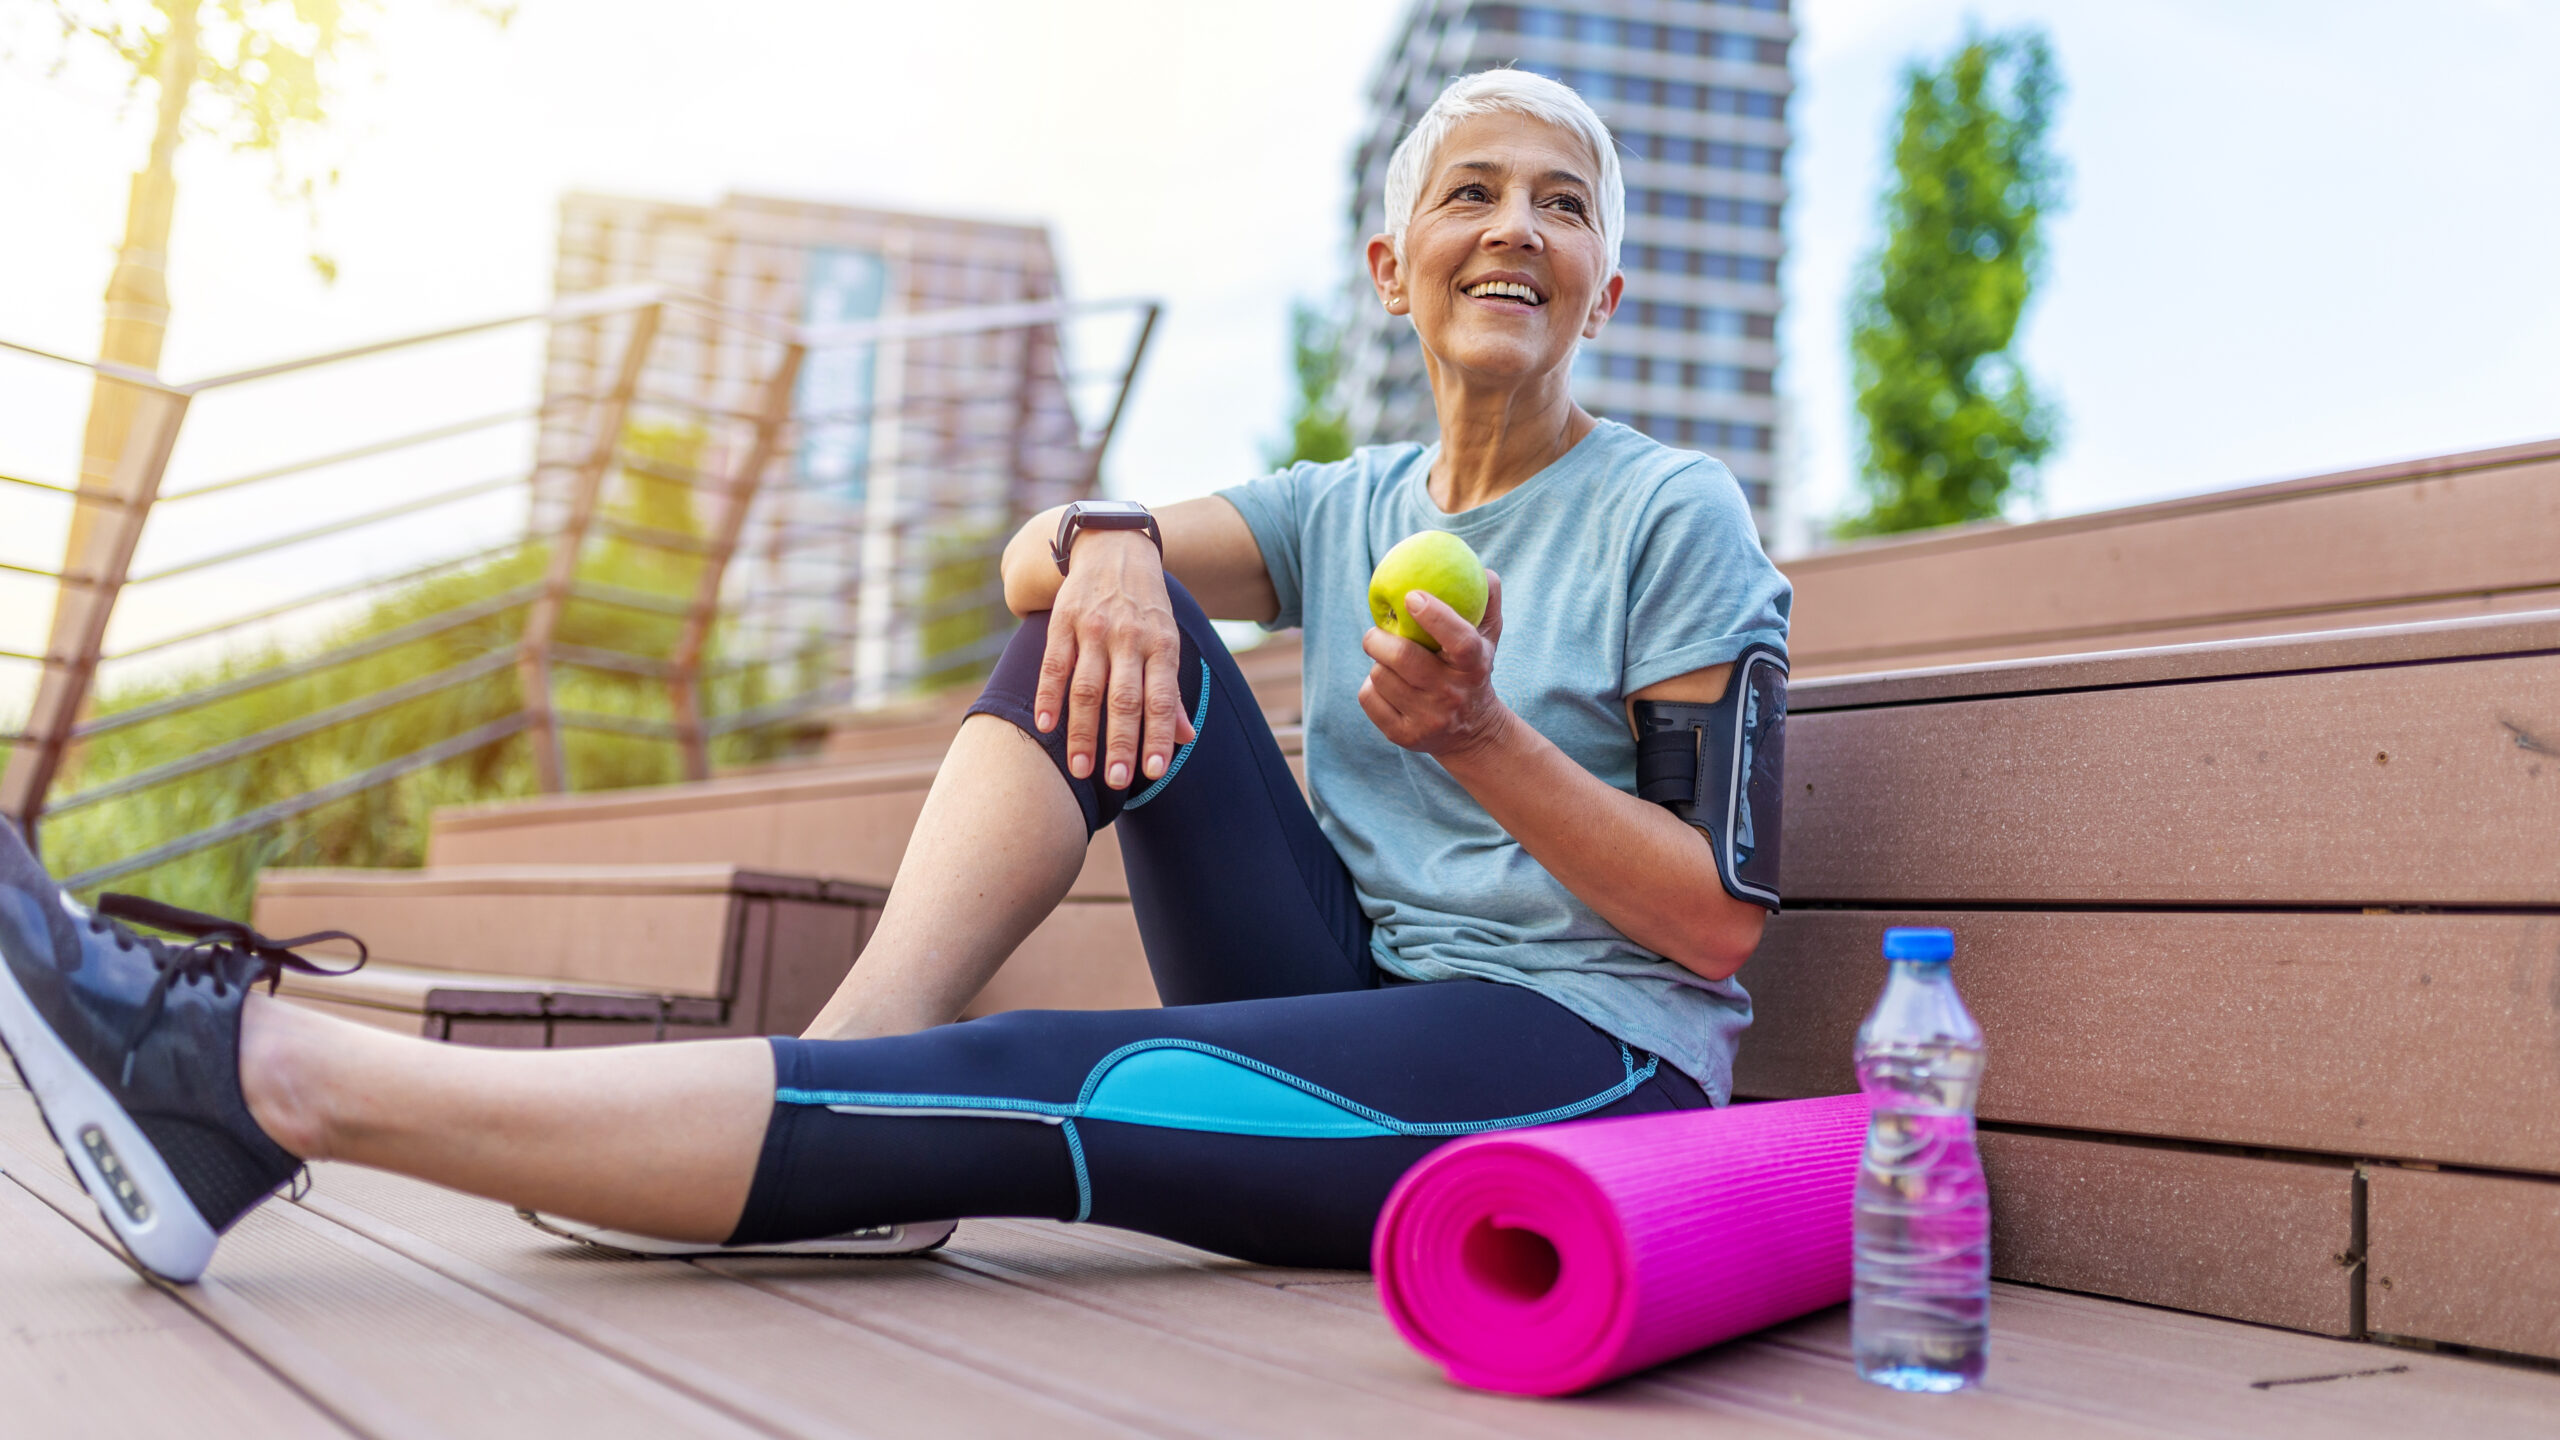 Woman with gray hair exercising in the city while eating an apple, image of new podcast episode about hardwired brains wtih Dr. Robert Lustig & Dr. Robert Barrett